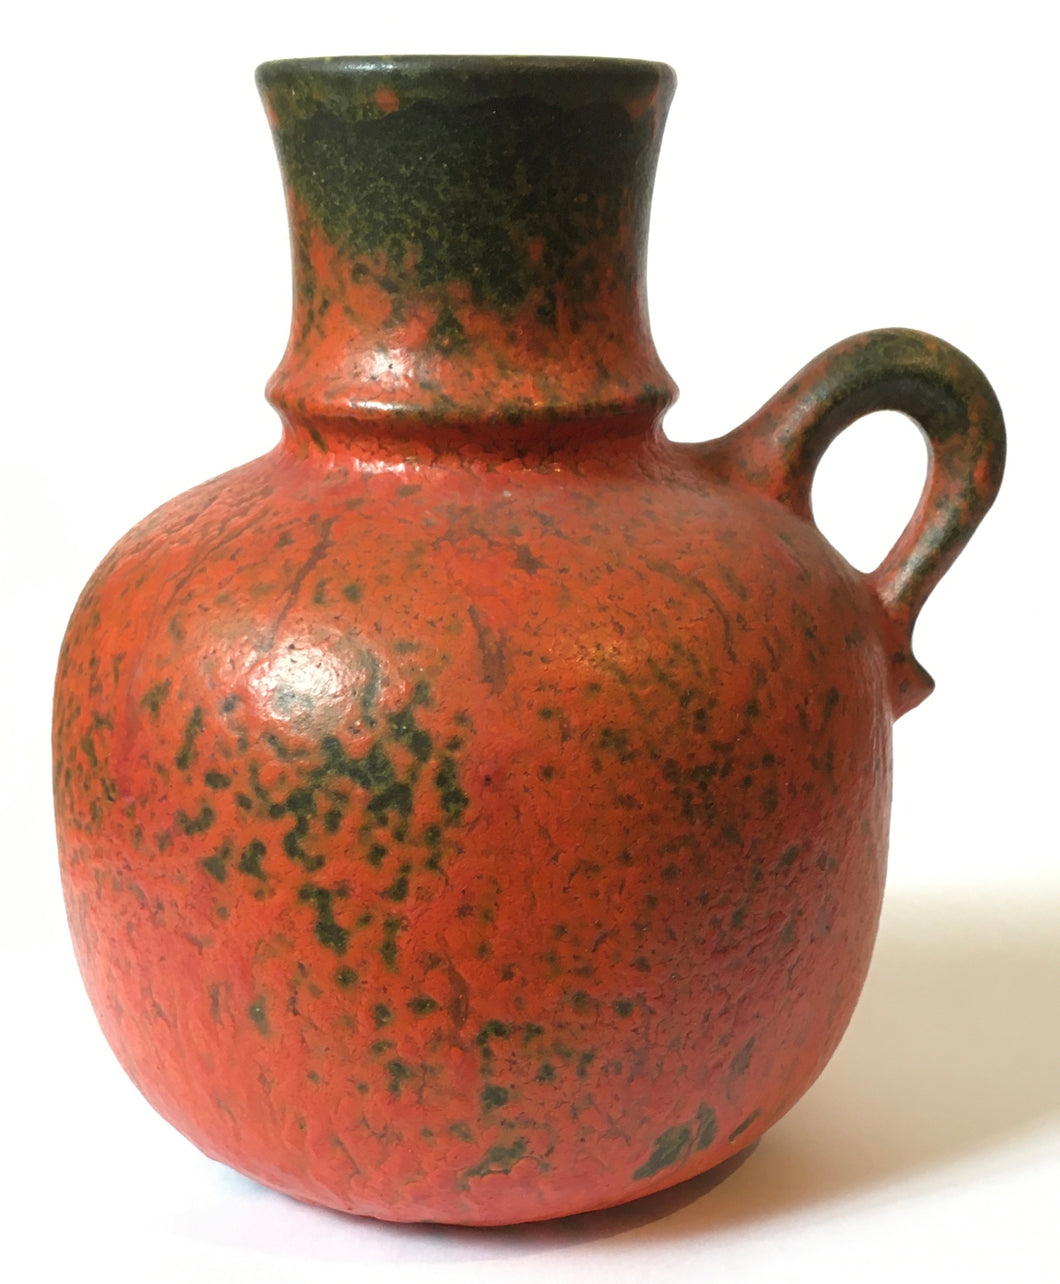 West German RUSCHA (Attributed) one Handled Vase  Red Lava Volcano glaze - Pottery mid century Modern c. 1950s Germany